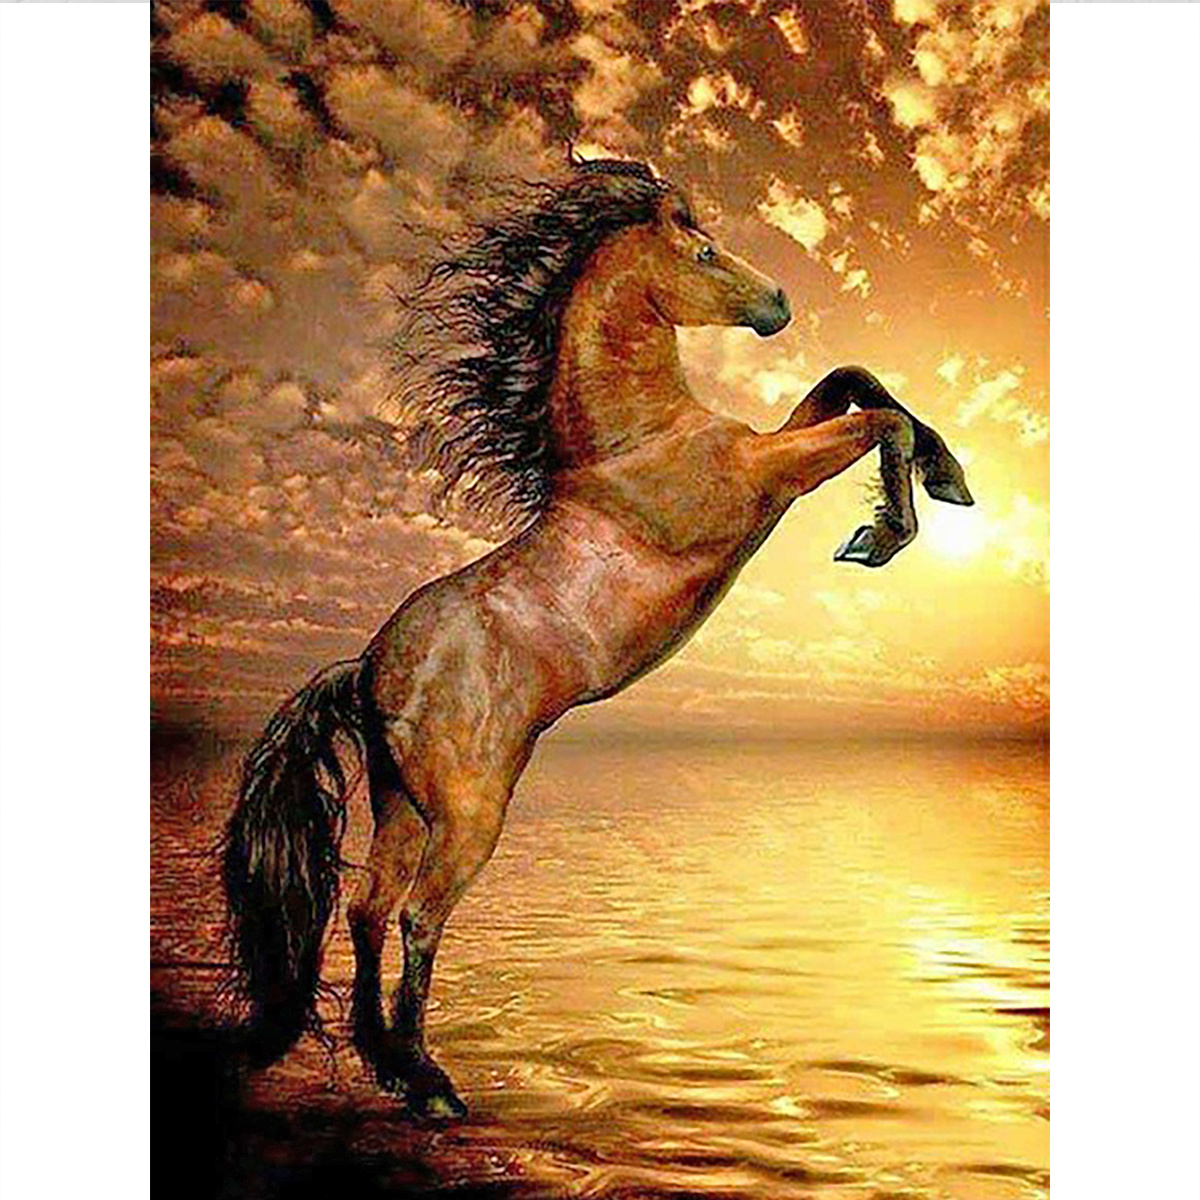 Noche Horse Diamond Painting Horse Full Drill Diamond Painting Kits,5d  Diamond Art,Gem Art for Adults Wall Home Decor 12x18 inch